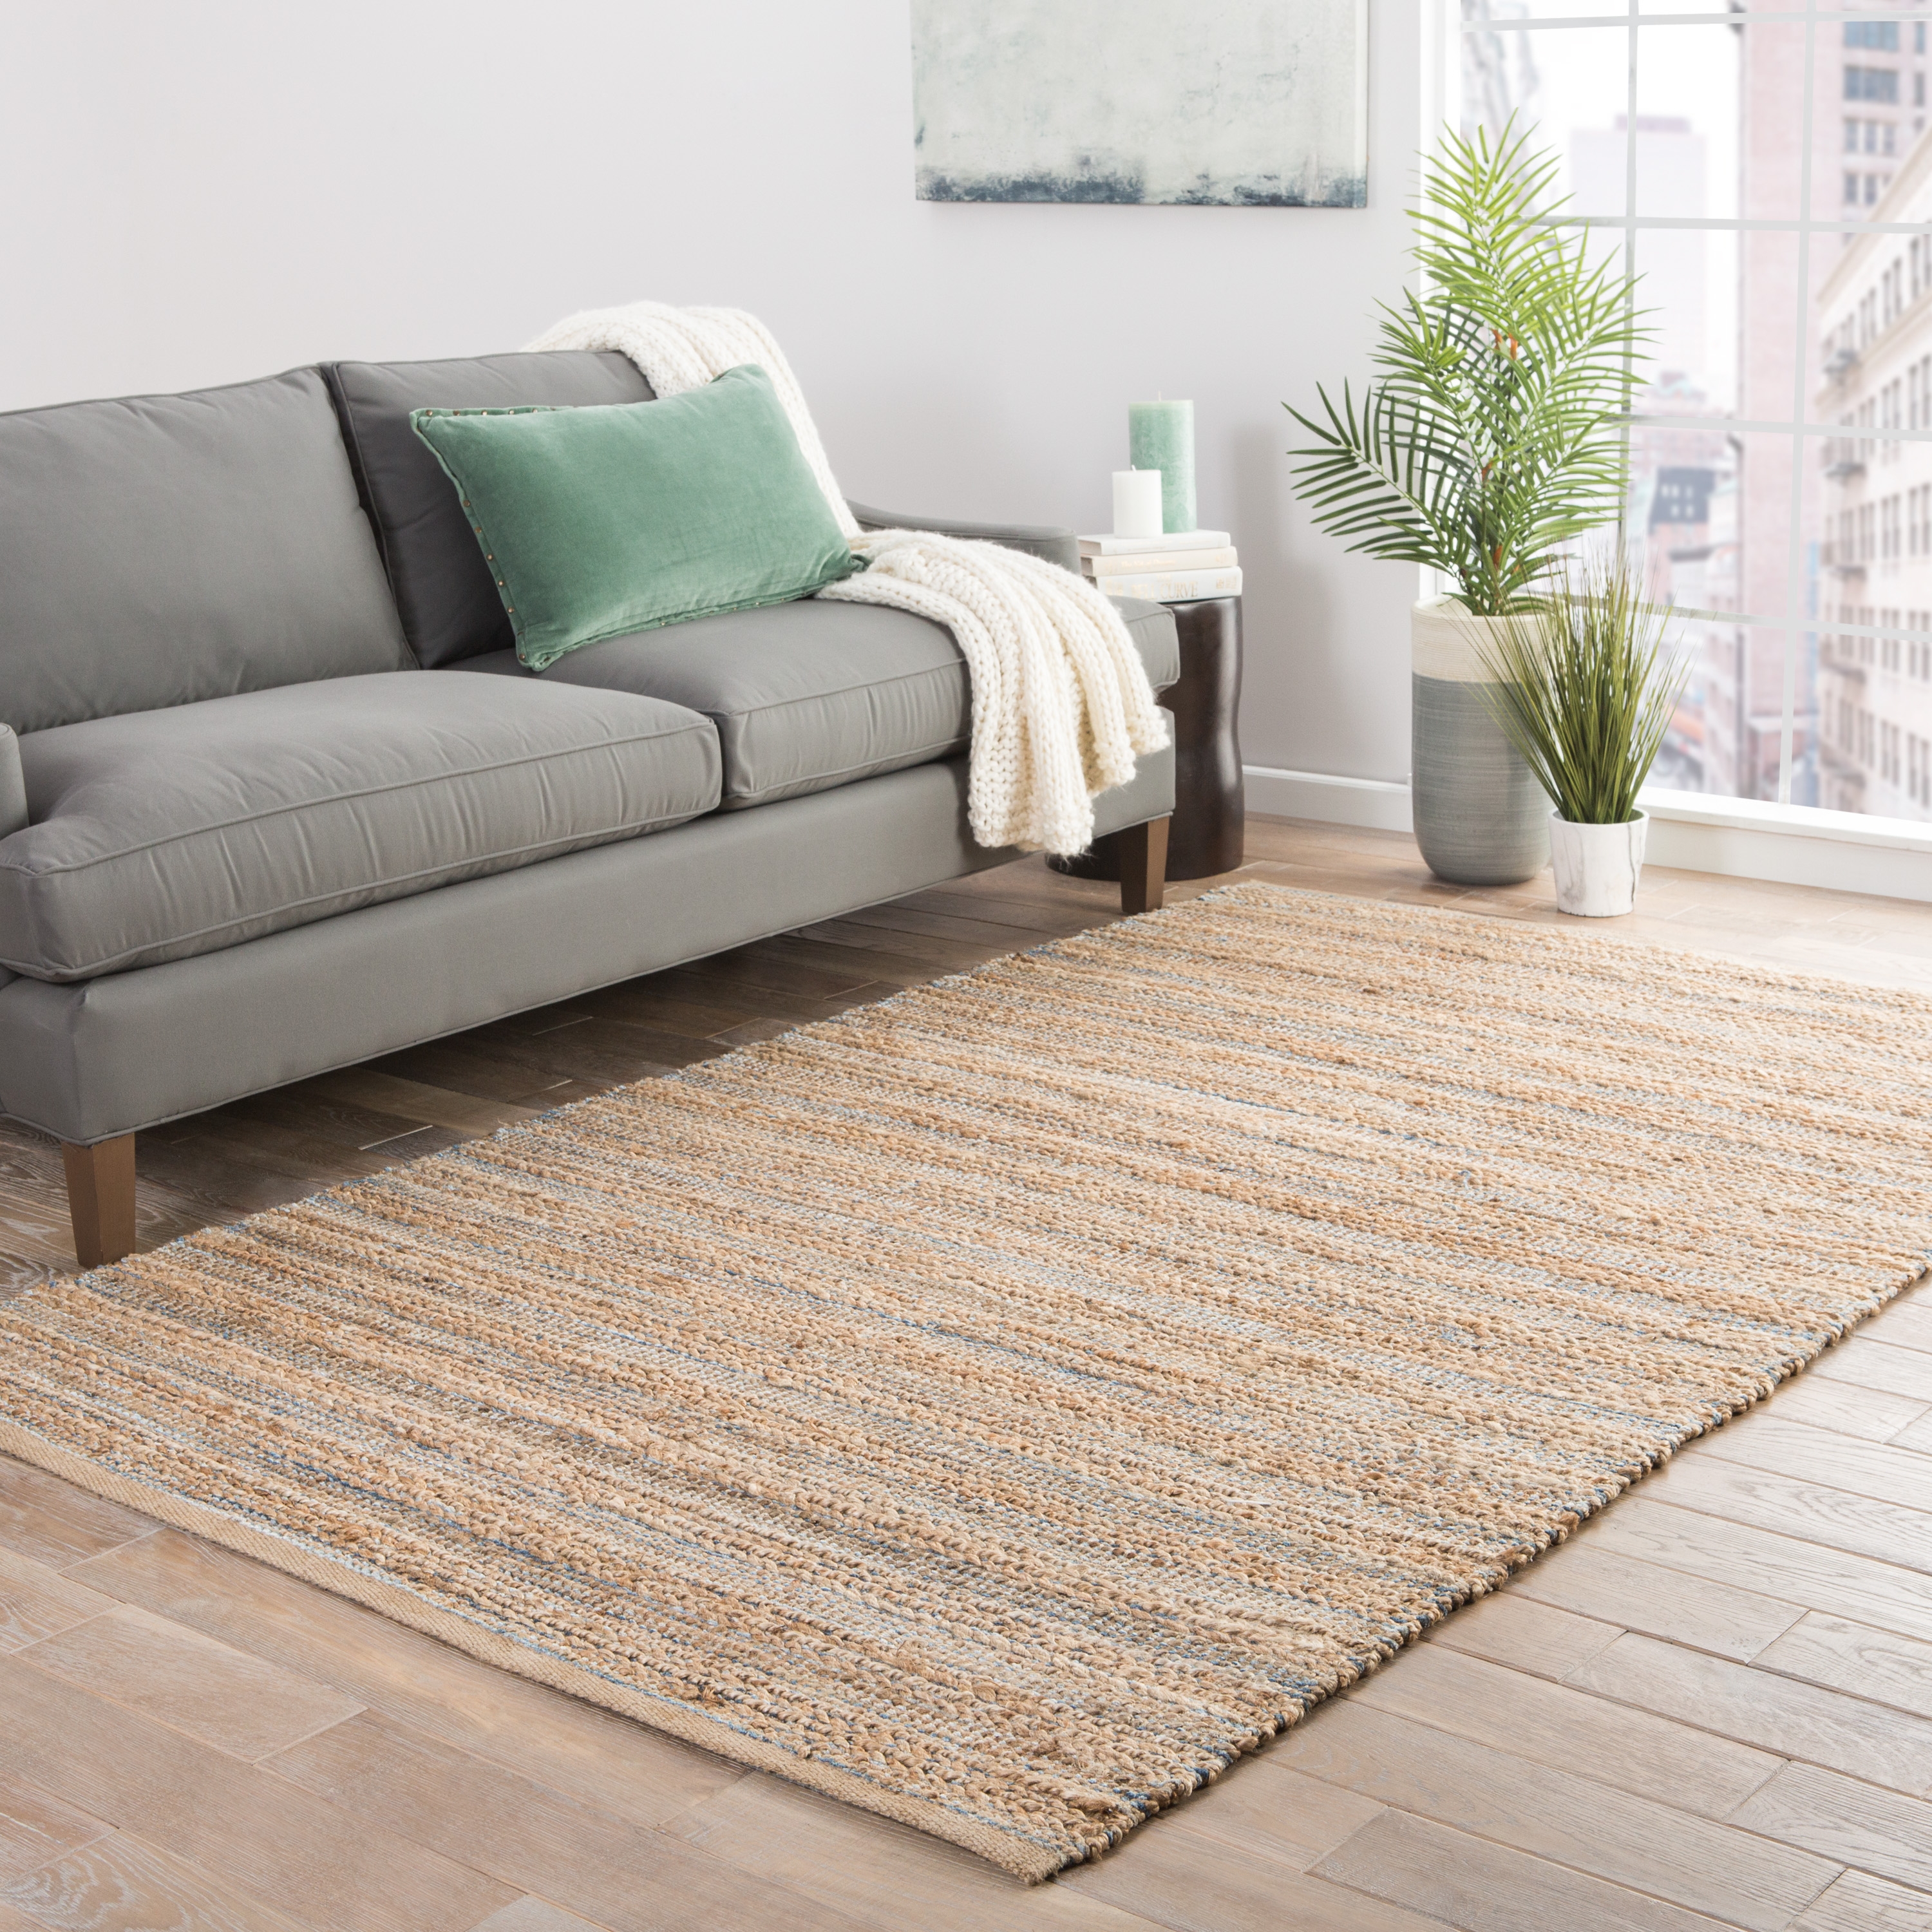 Canterbury Natural Solid Beige/ Blue Runner Rug (2'6" X 9') - Image 4